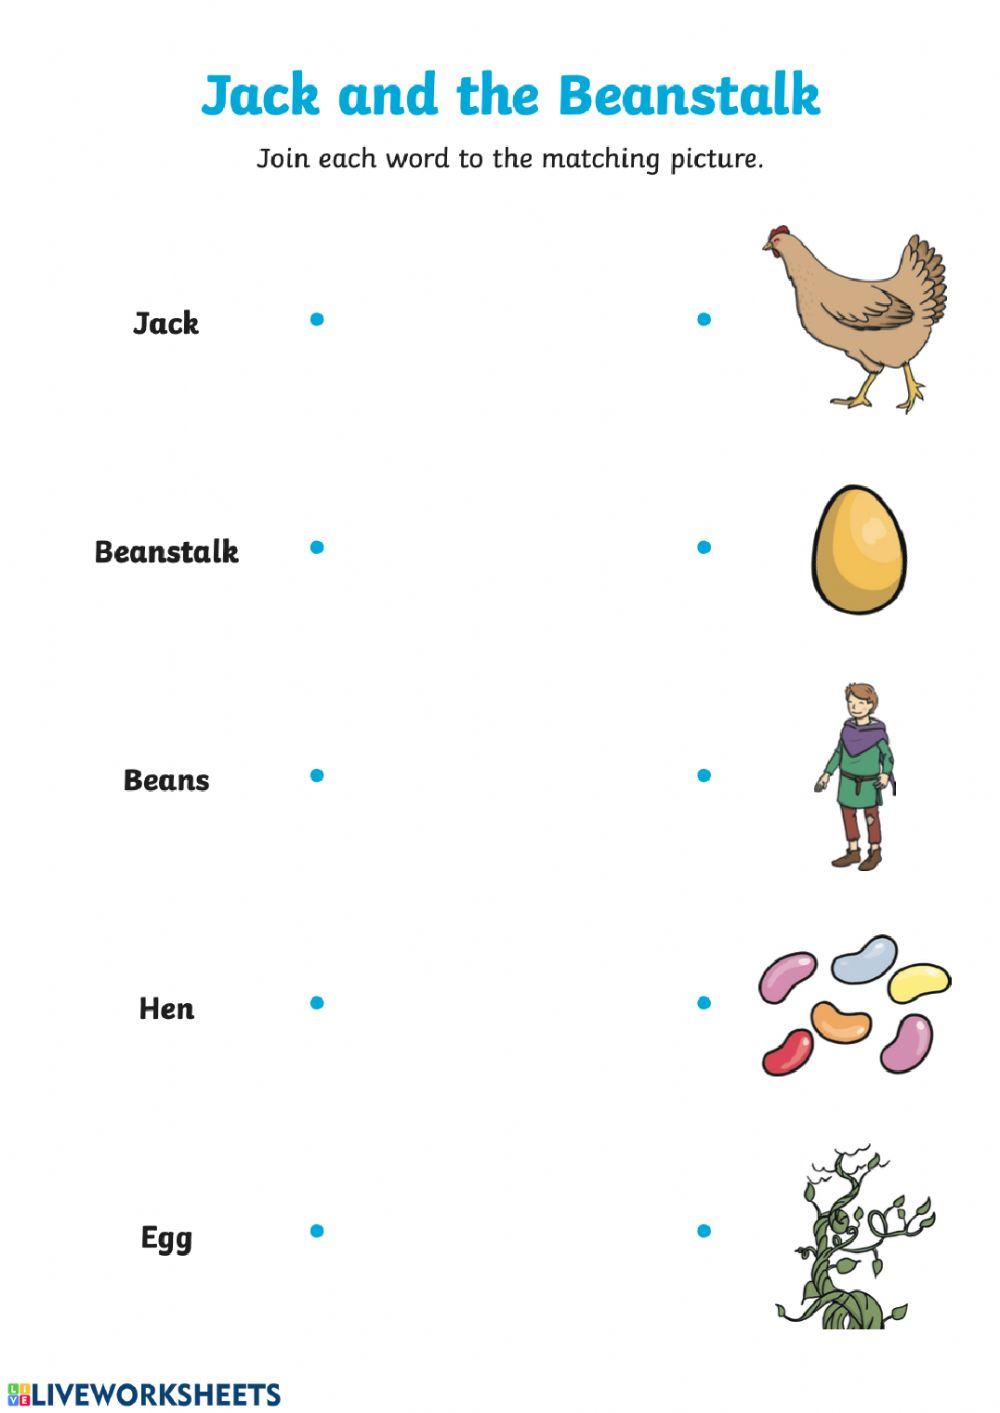 Jack and the beanstalk vocabulary